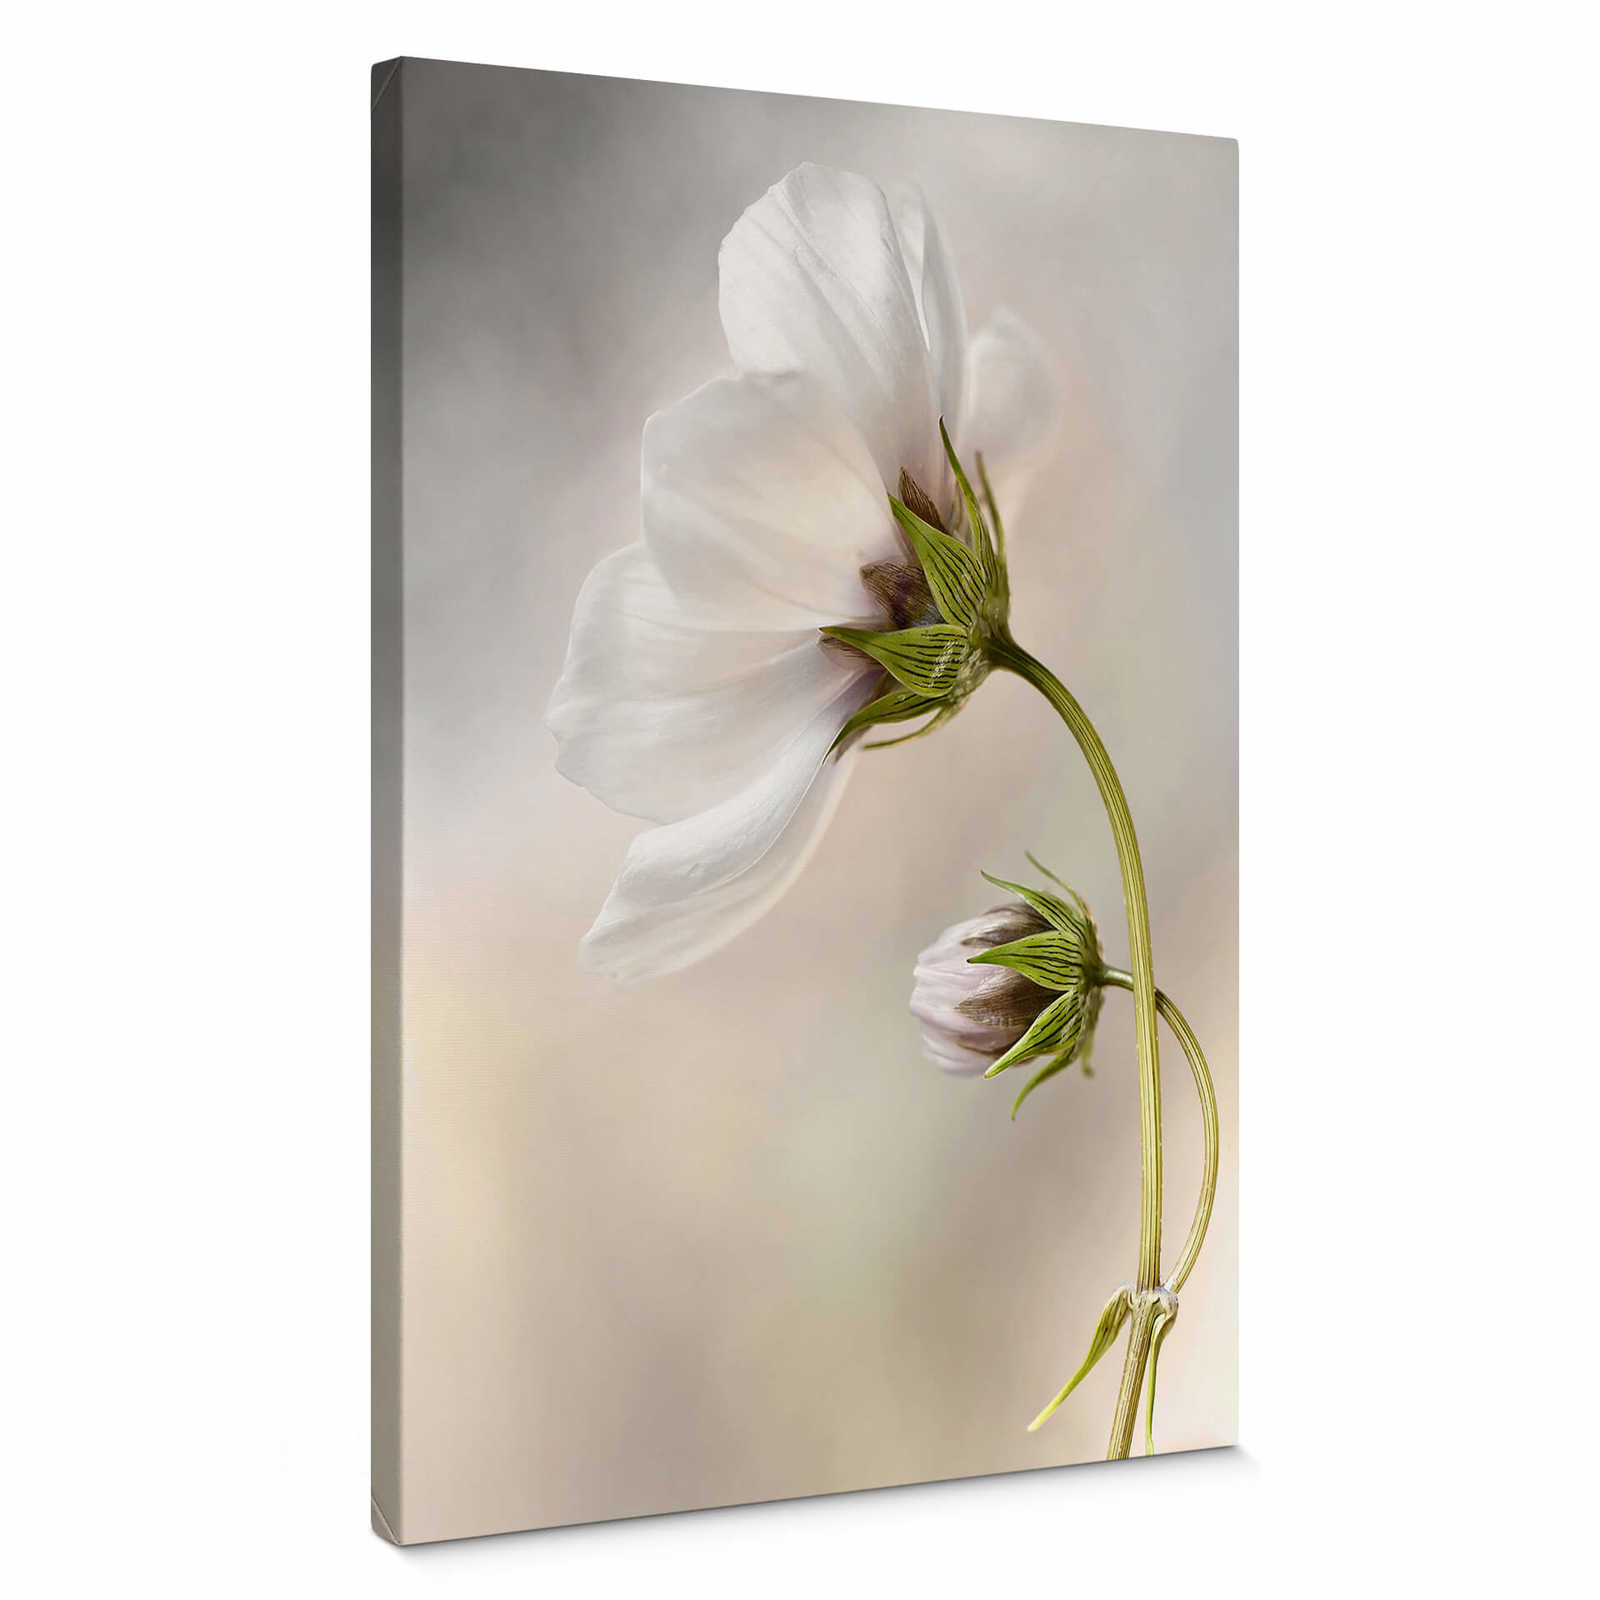         Canvas print flower head, photograph by Disher – white
    